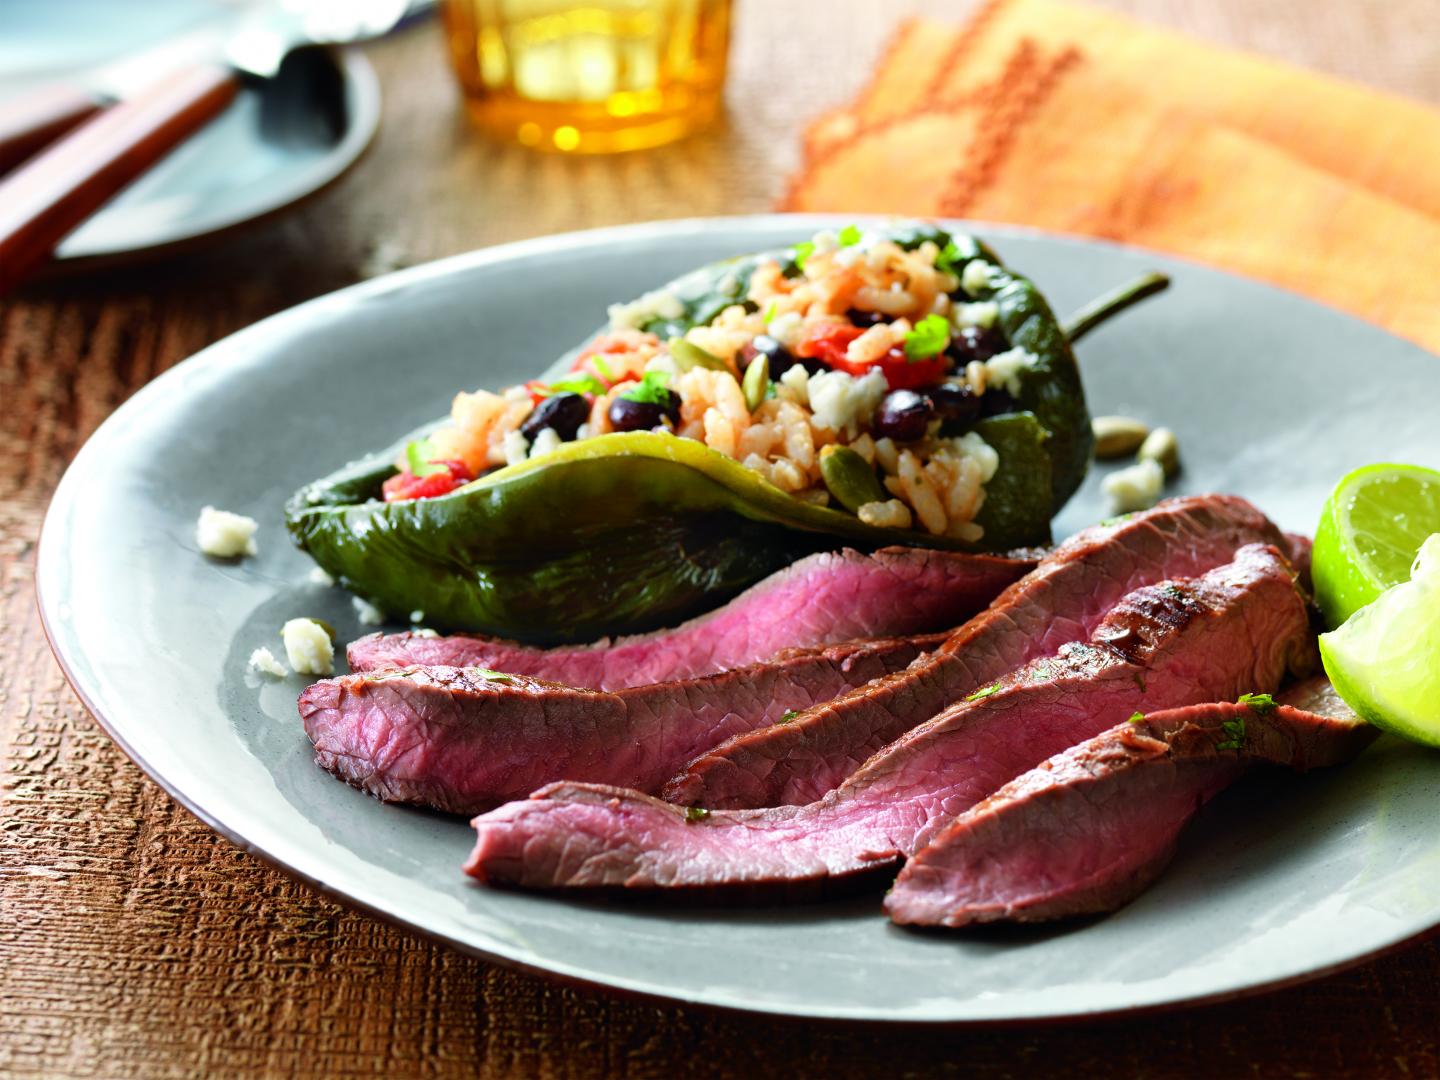 Lime-Marinated Flank Steak with Stuffed Poblano Peppers